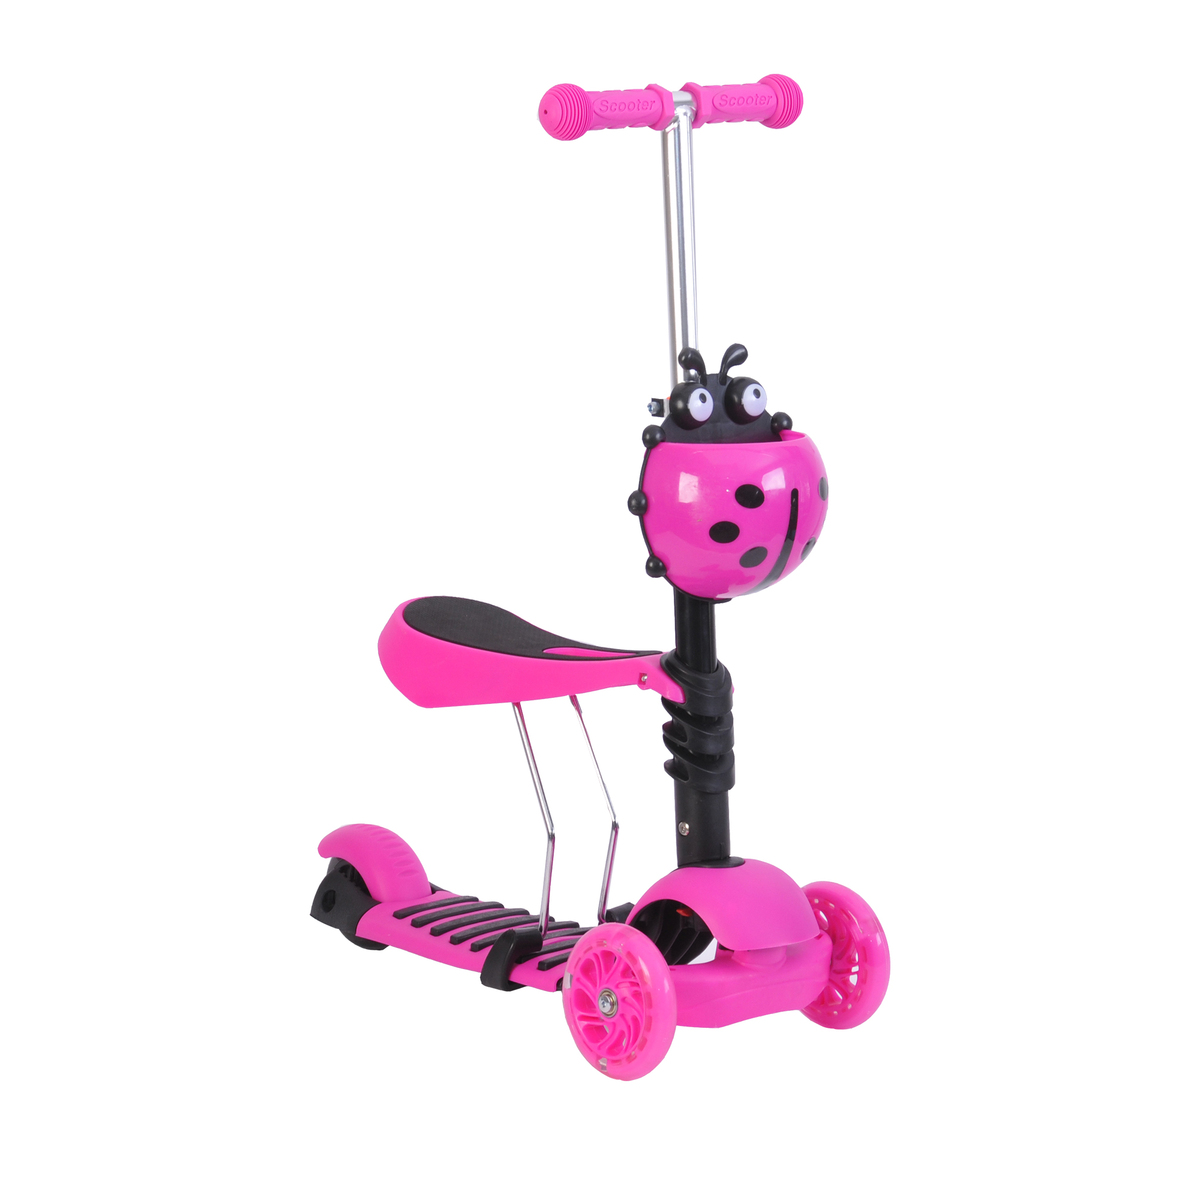 Skid Fusion Kick Scooter 3Wheel Assorted Color L-507